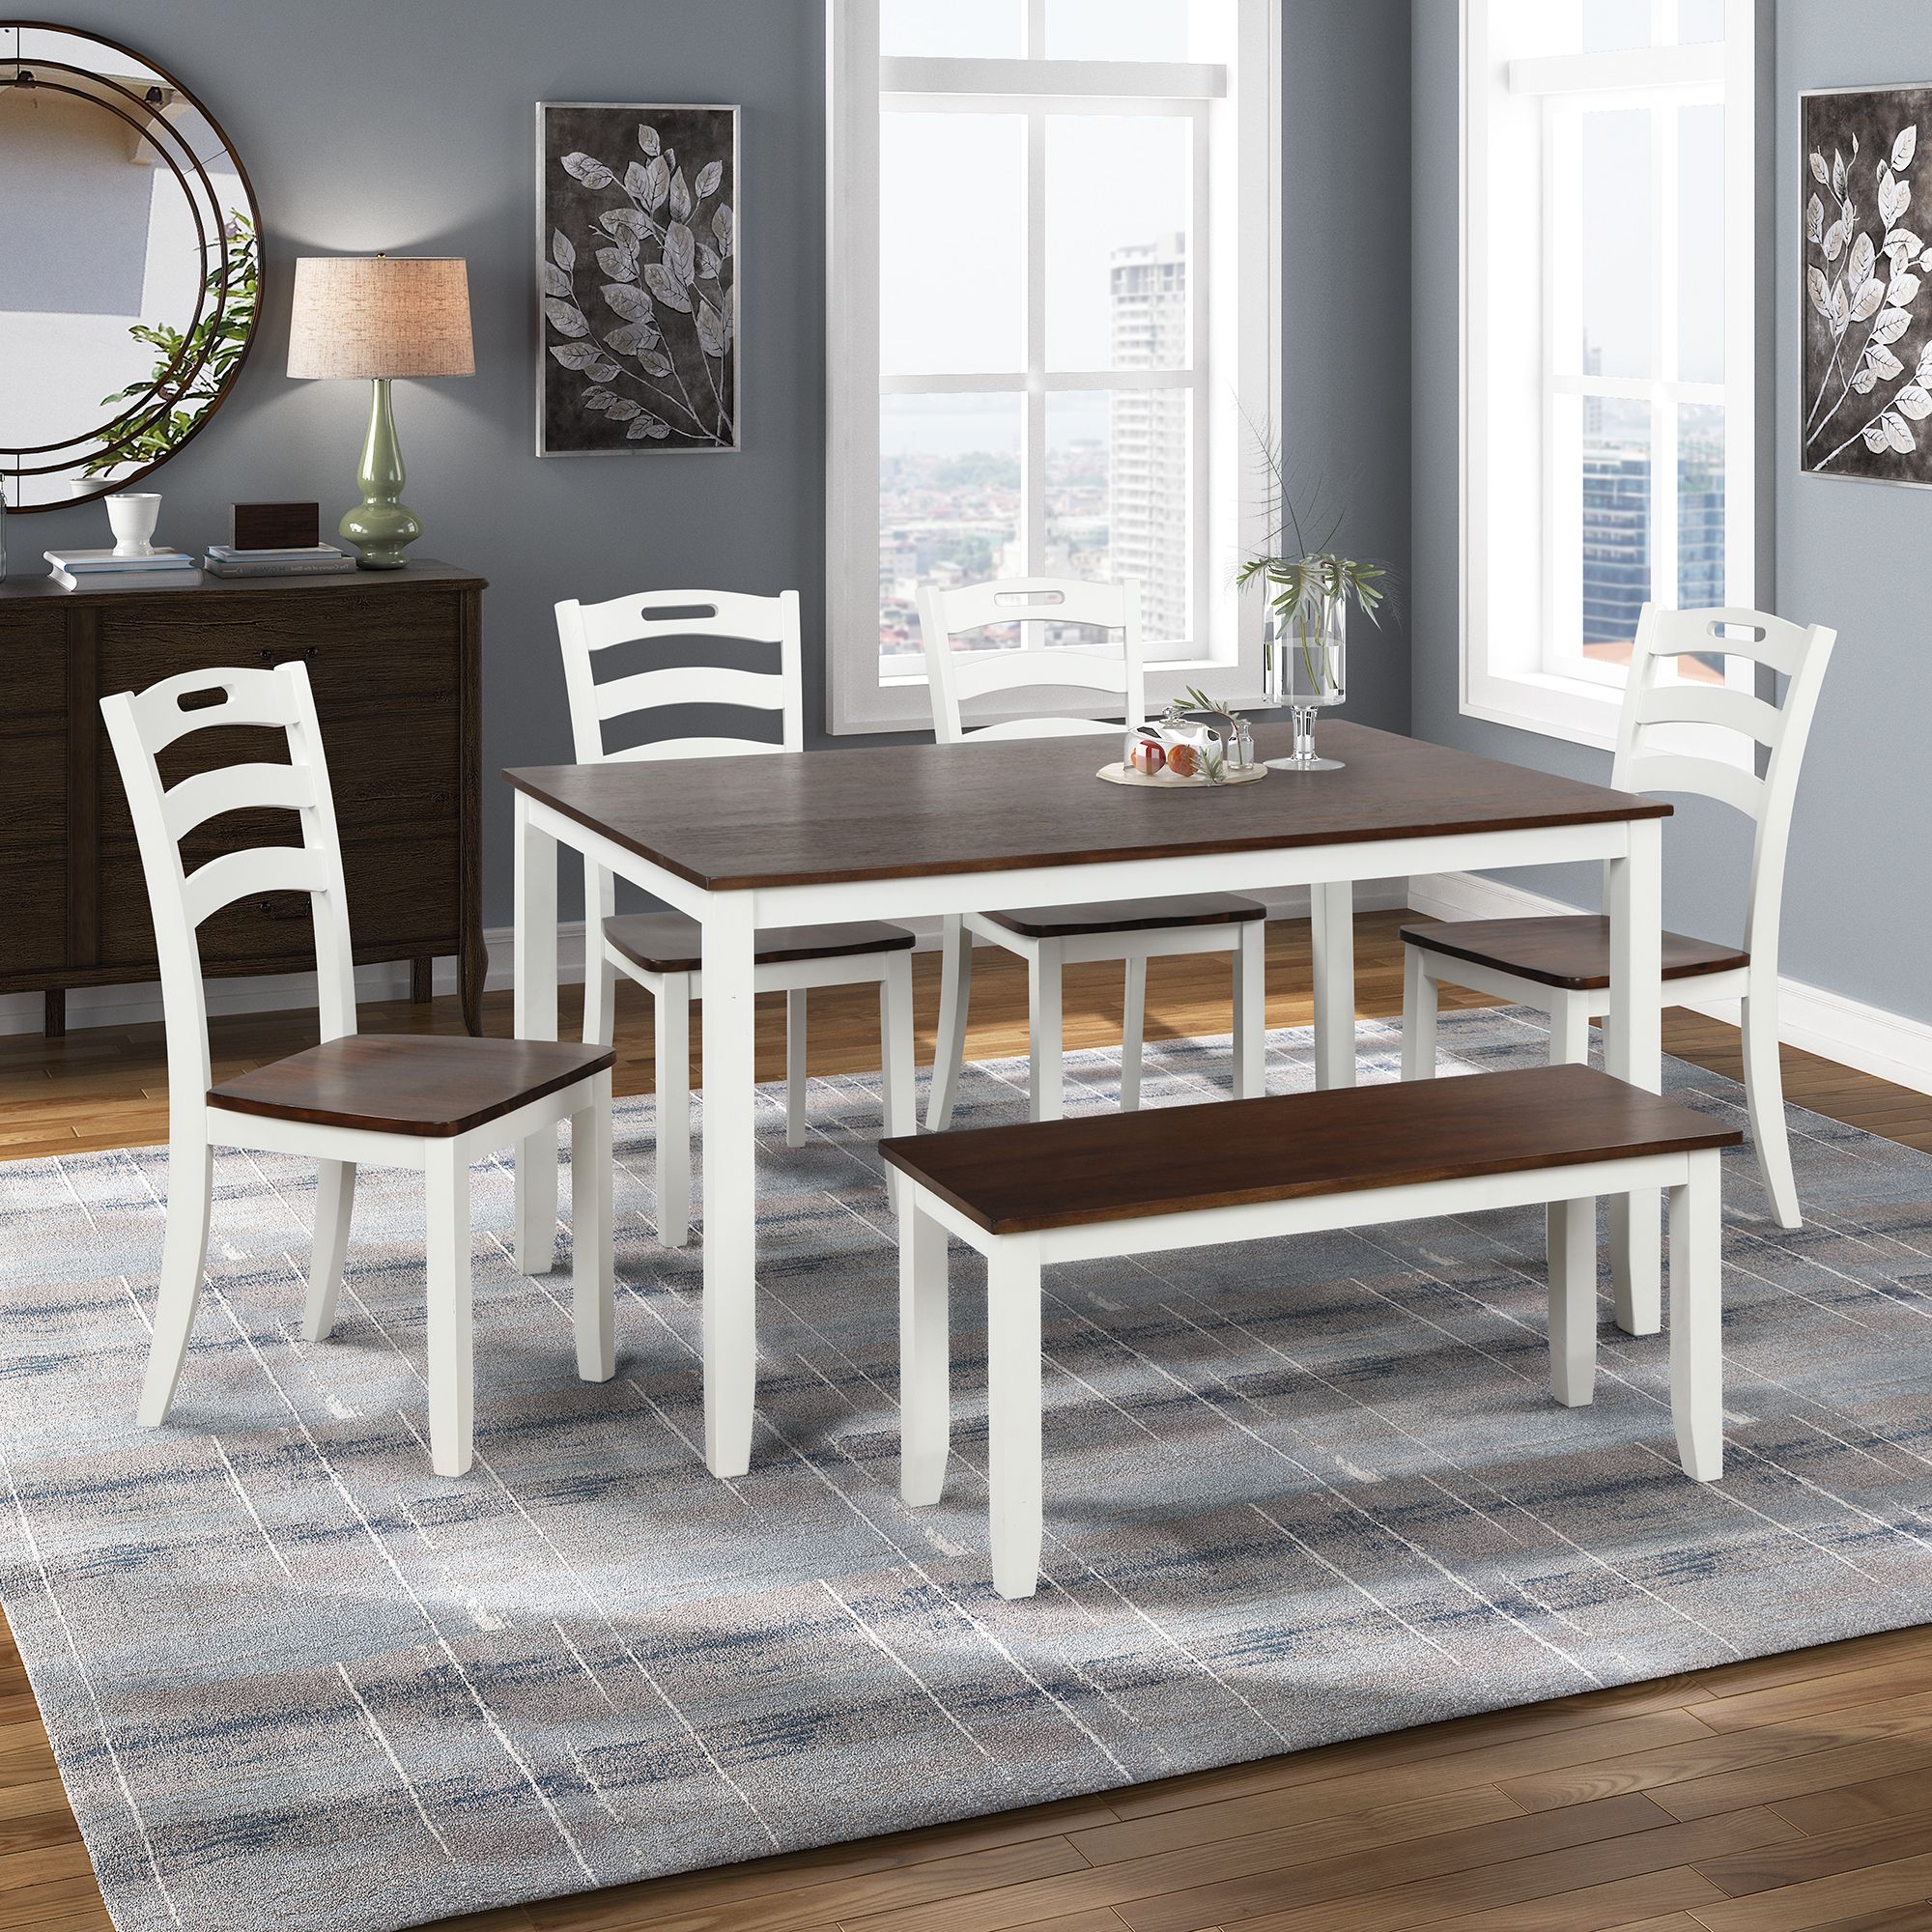 Kitchen Table And 4 Chairs Set, Urhomepro 6 Piece Wood Dining Set With Throughout Popular Wood Bistro Table And Chairs Sets (View 9 of 15)